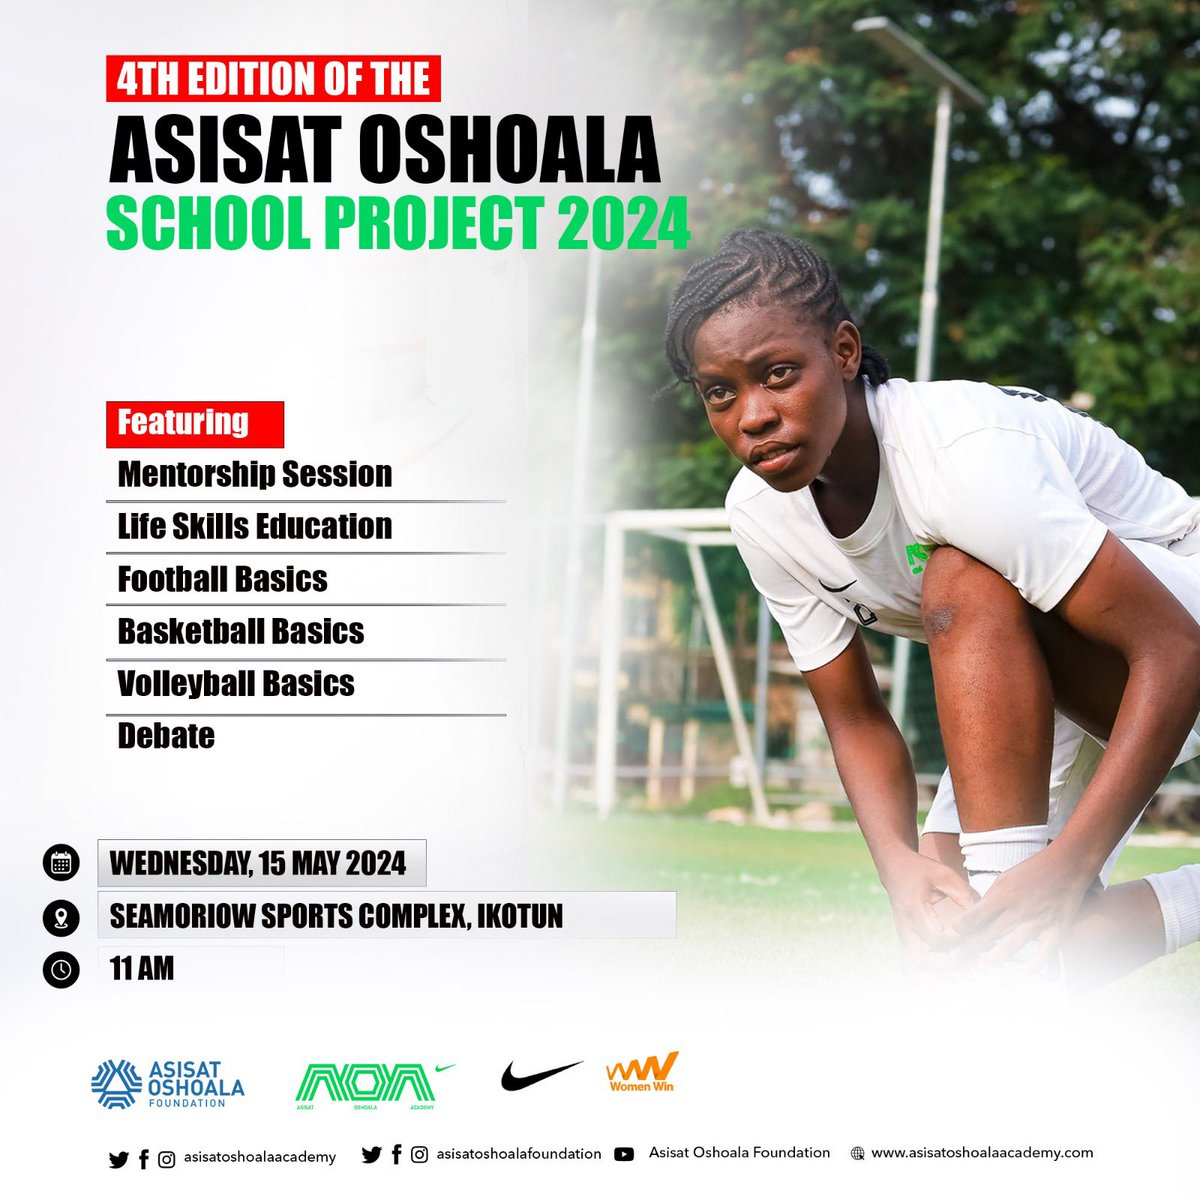 Thrilled to announce the 4th edition of the Asisat Oshoala Academy School Project! 🌟 Join us @SEAMORIOW sports complex Ikotun, for an inspiring day filled with sports, leadership, and life skills sessions, alongside mentorship opportunities. Powered by @Nike #SchoolProject